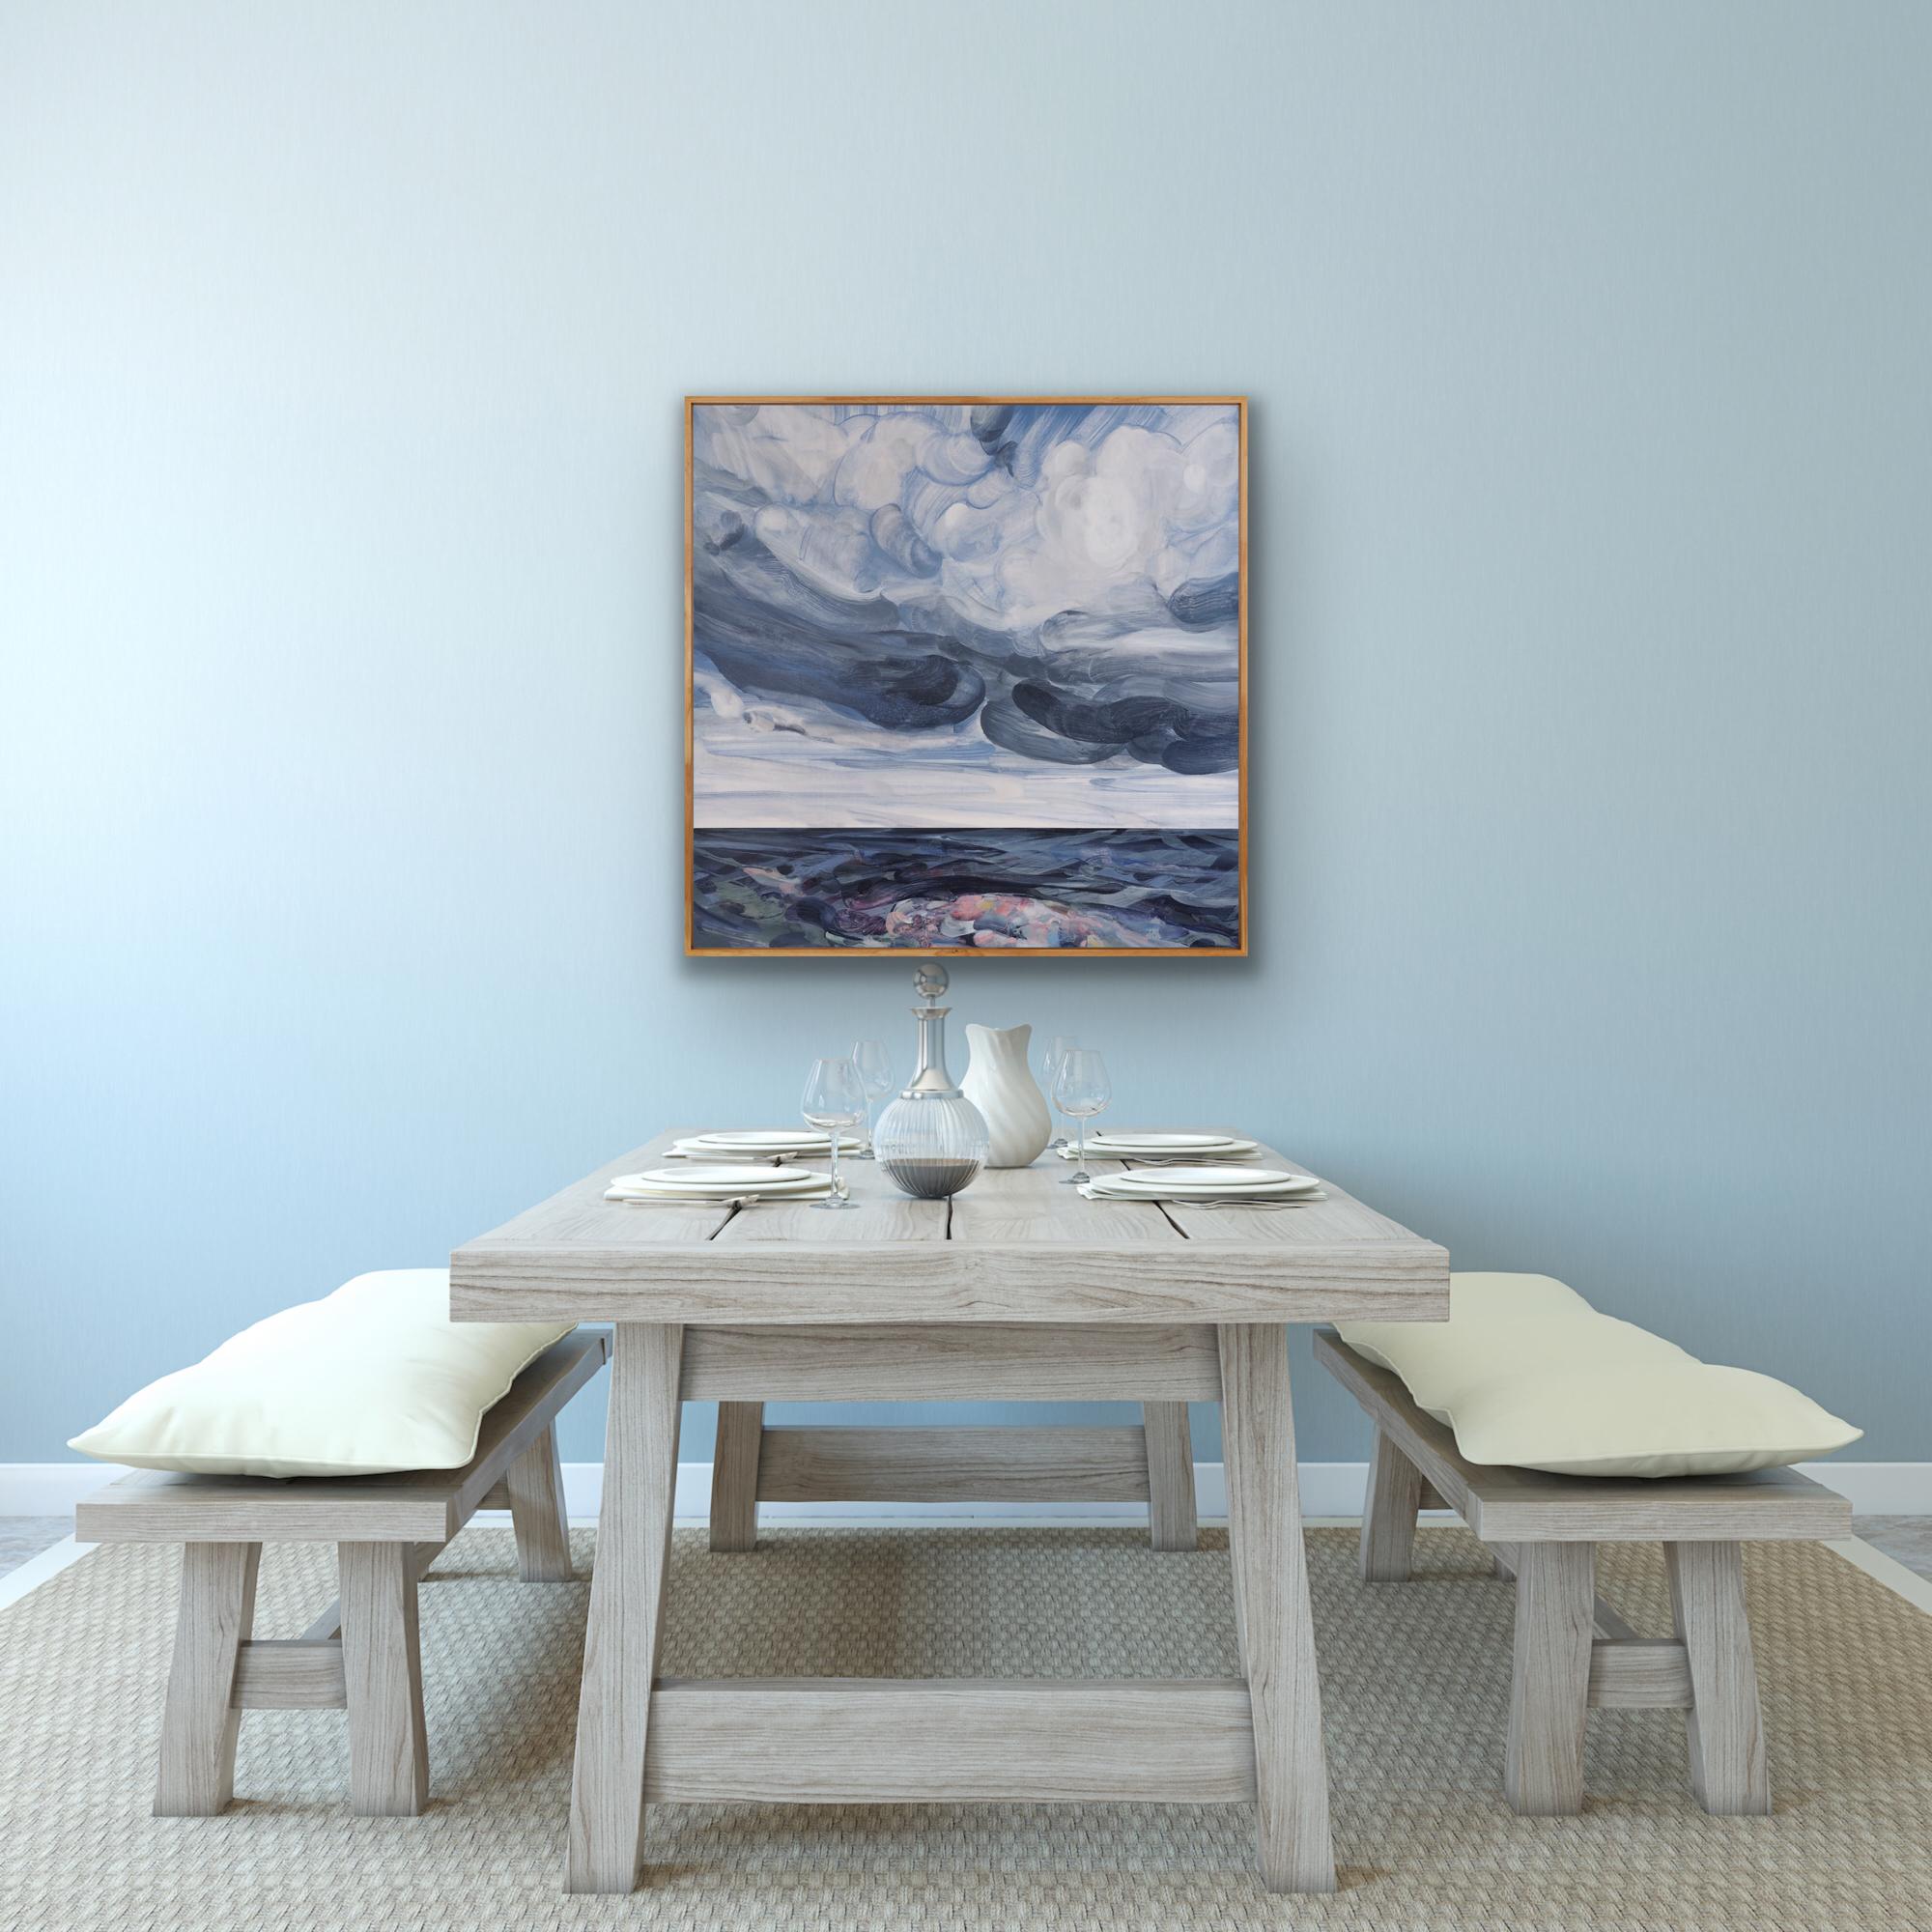 The Sailor and the Albatross, Framed Oil Painting, Seascape, Coastal, Skyscape For Sale 4